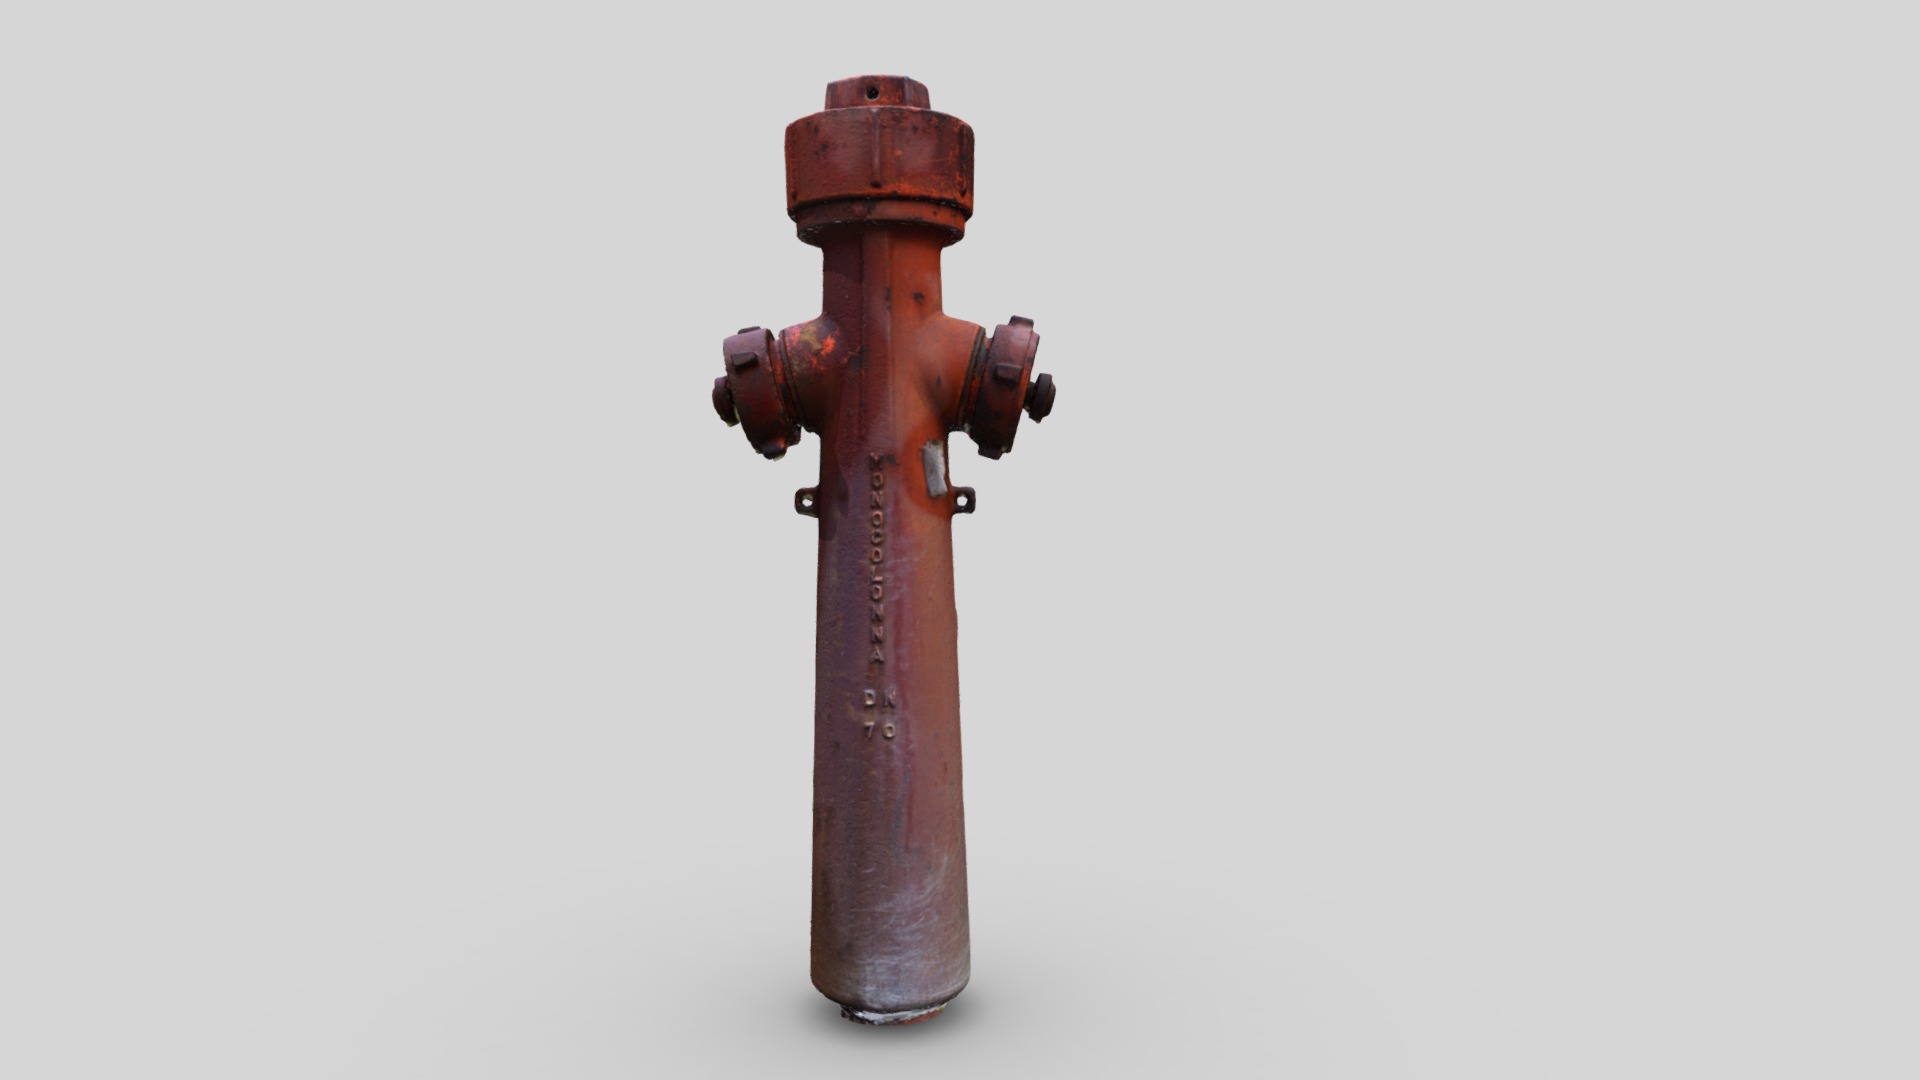 3D model Hydrant – Photogrammetry City - This is a 3D model of the Hydrant - Photogrammetry City. The 3D model is about a red fire hydrant.